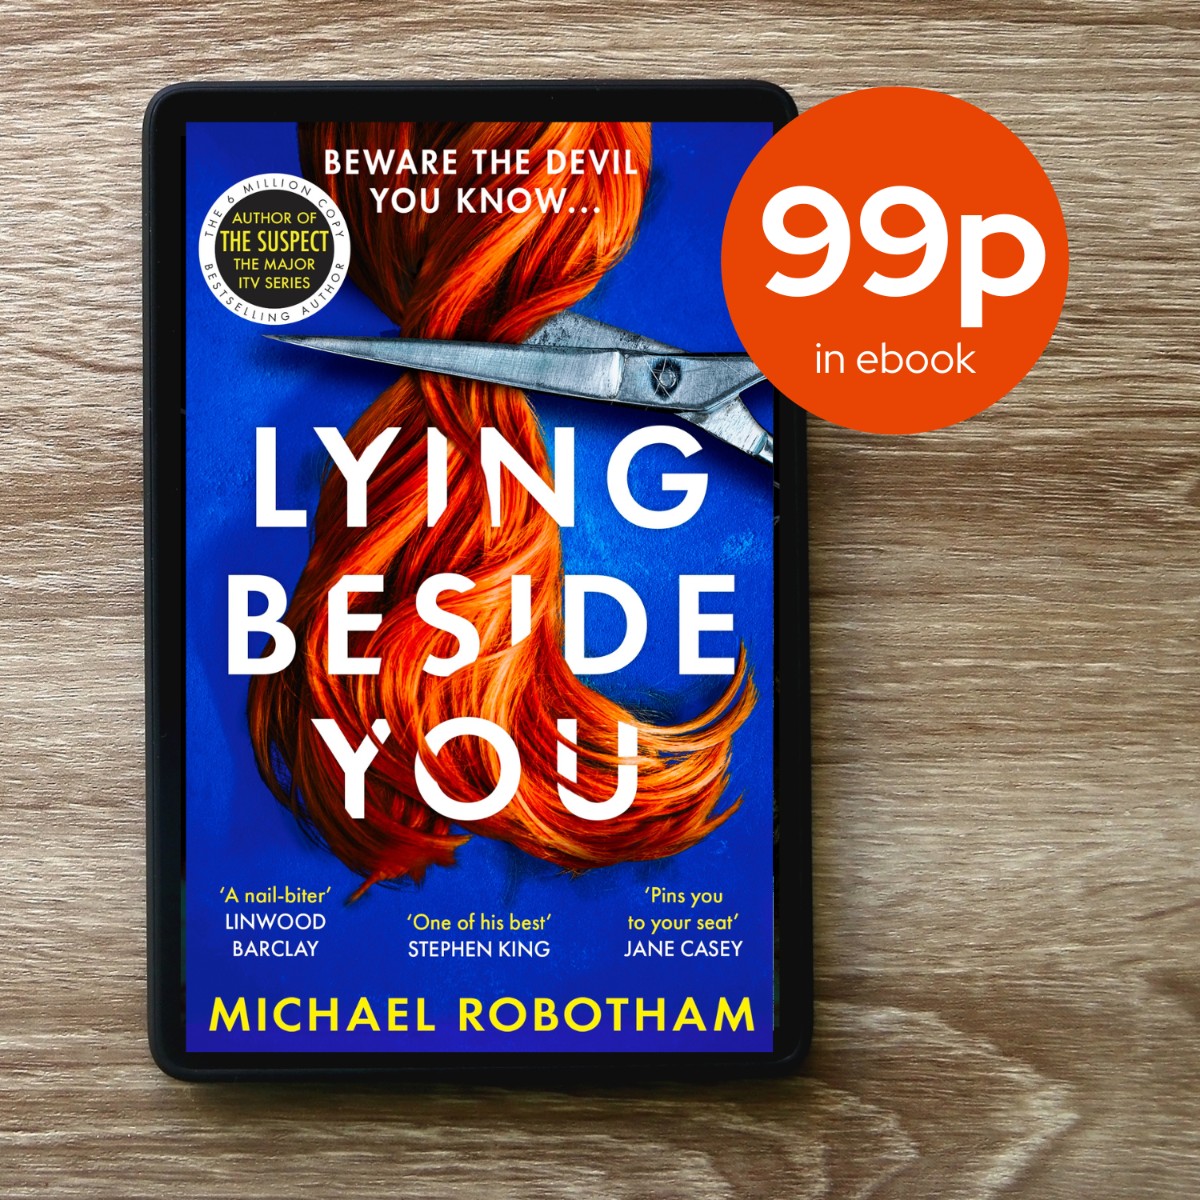 EBOOK DEAL ALERT! #LyingBesideYou, the unputdownable thriller from bestseller @michaelrobotham is now just 99p in ebook for a limited time! Beware the devil you know. . . Download your copy now: amzn.to/48mKHIq